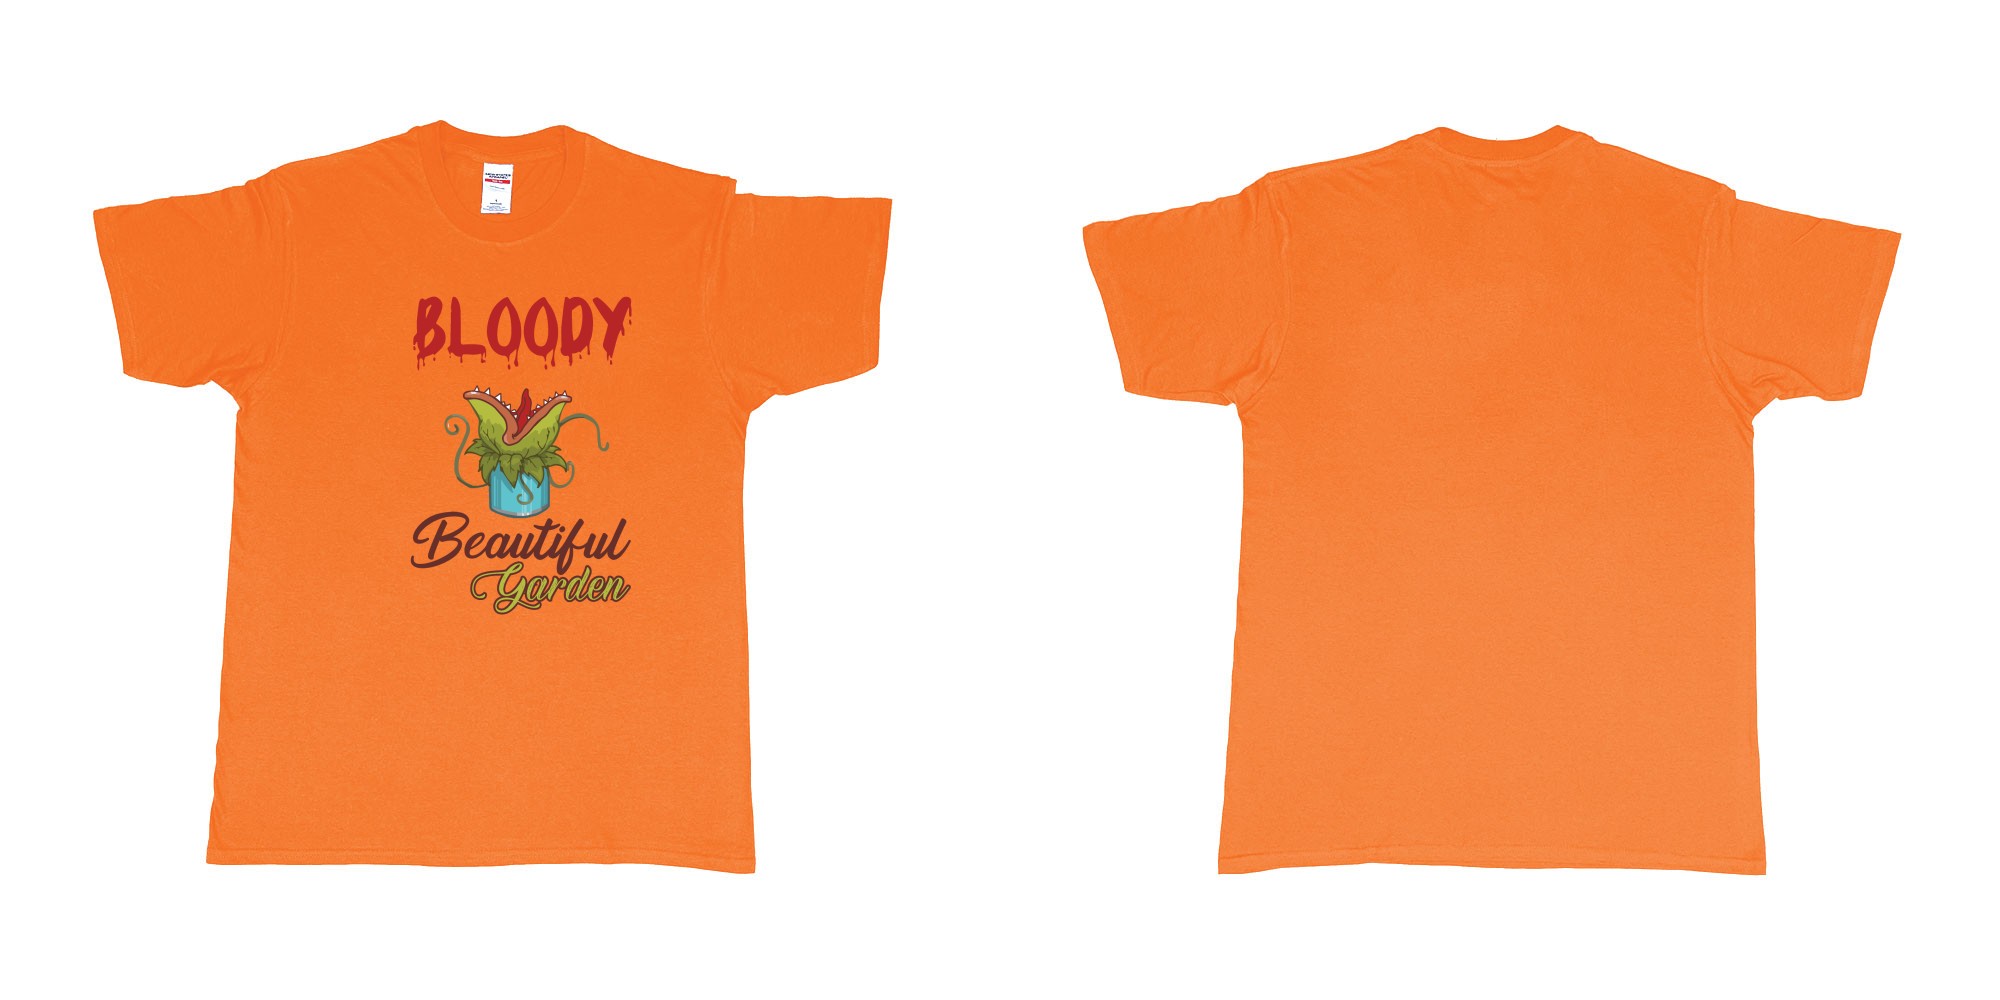 Custom tshirt design bloody beautiful garden little shop of horror in fabric color orange choice your own text made in Bali by The Pirate Way